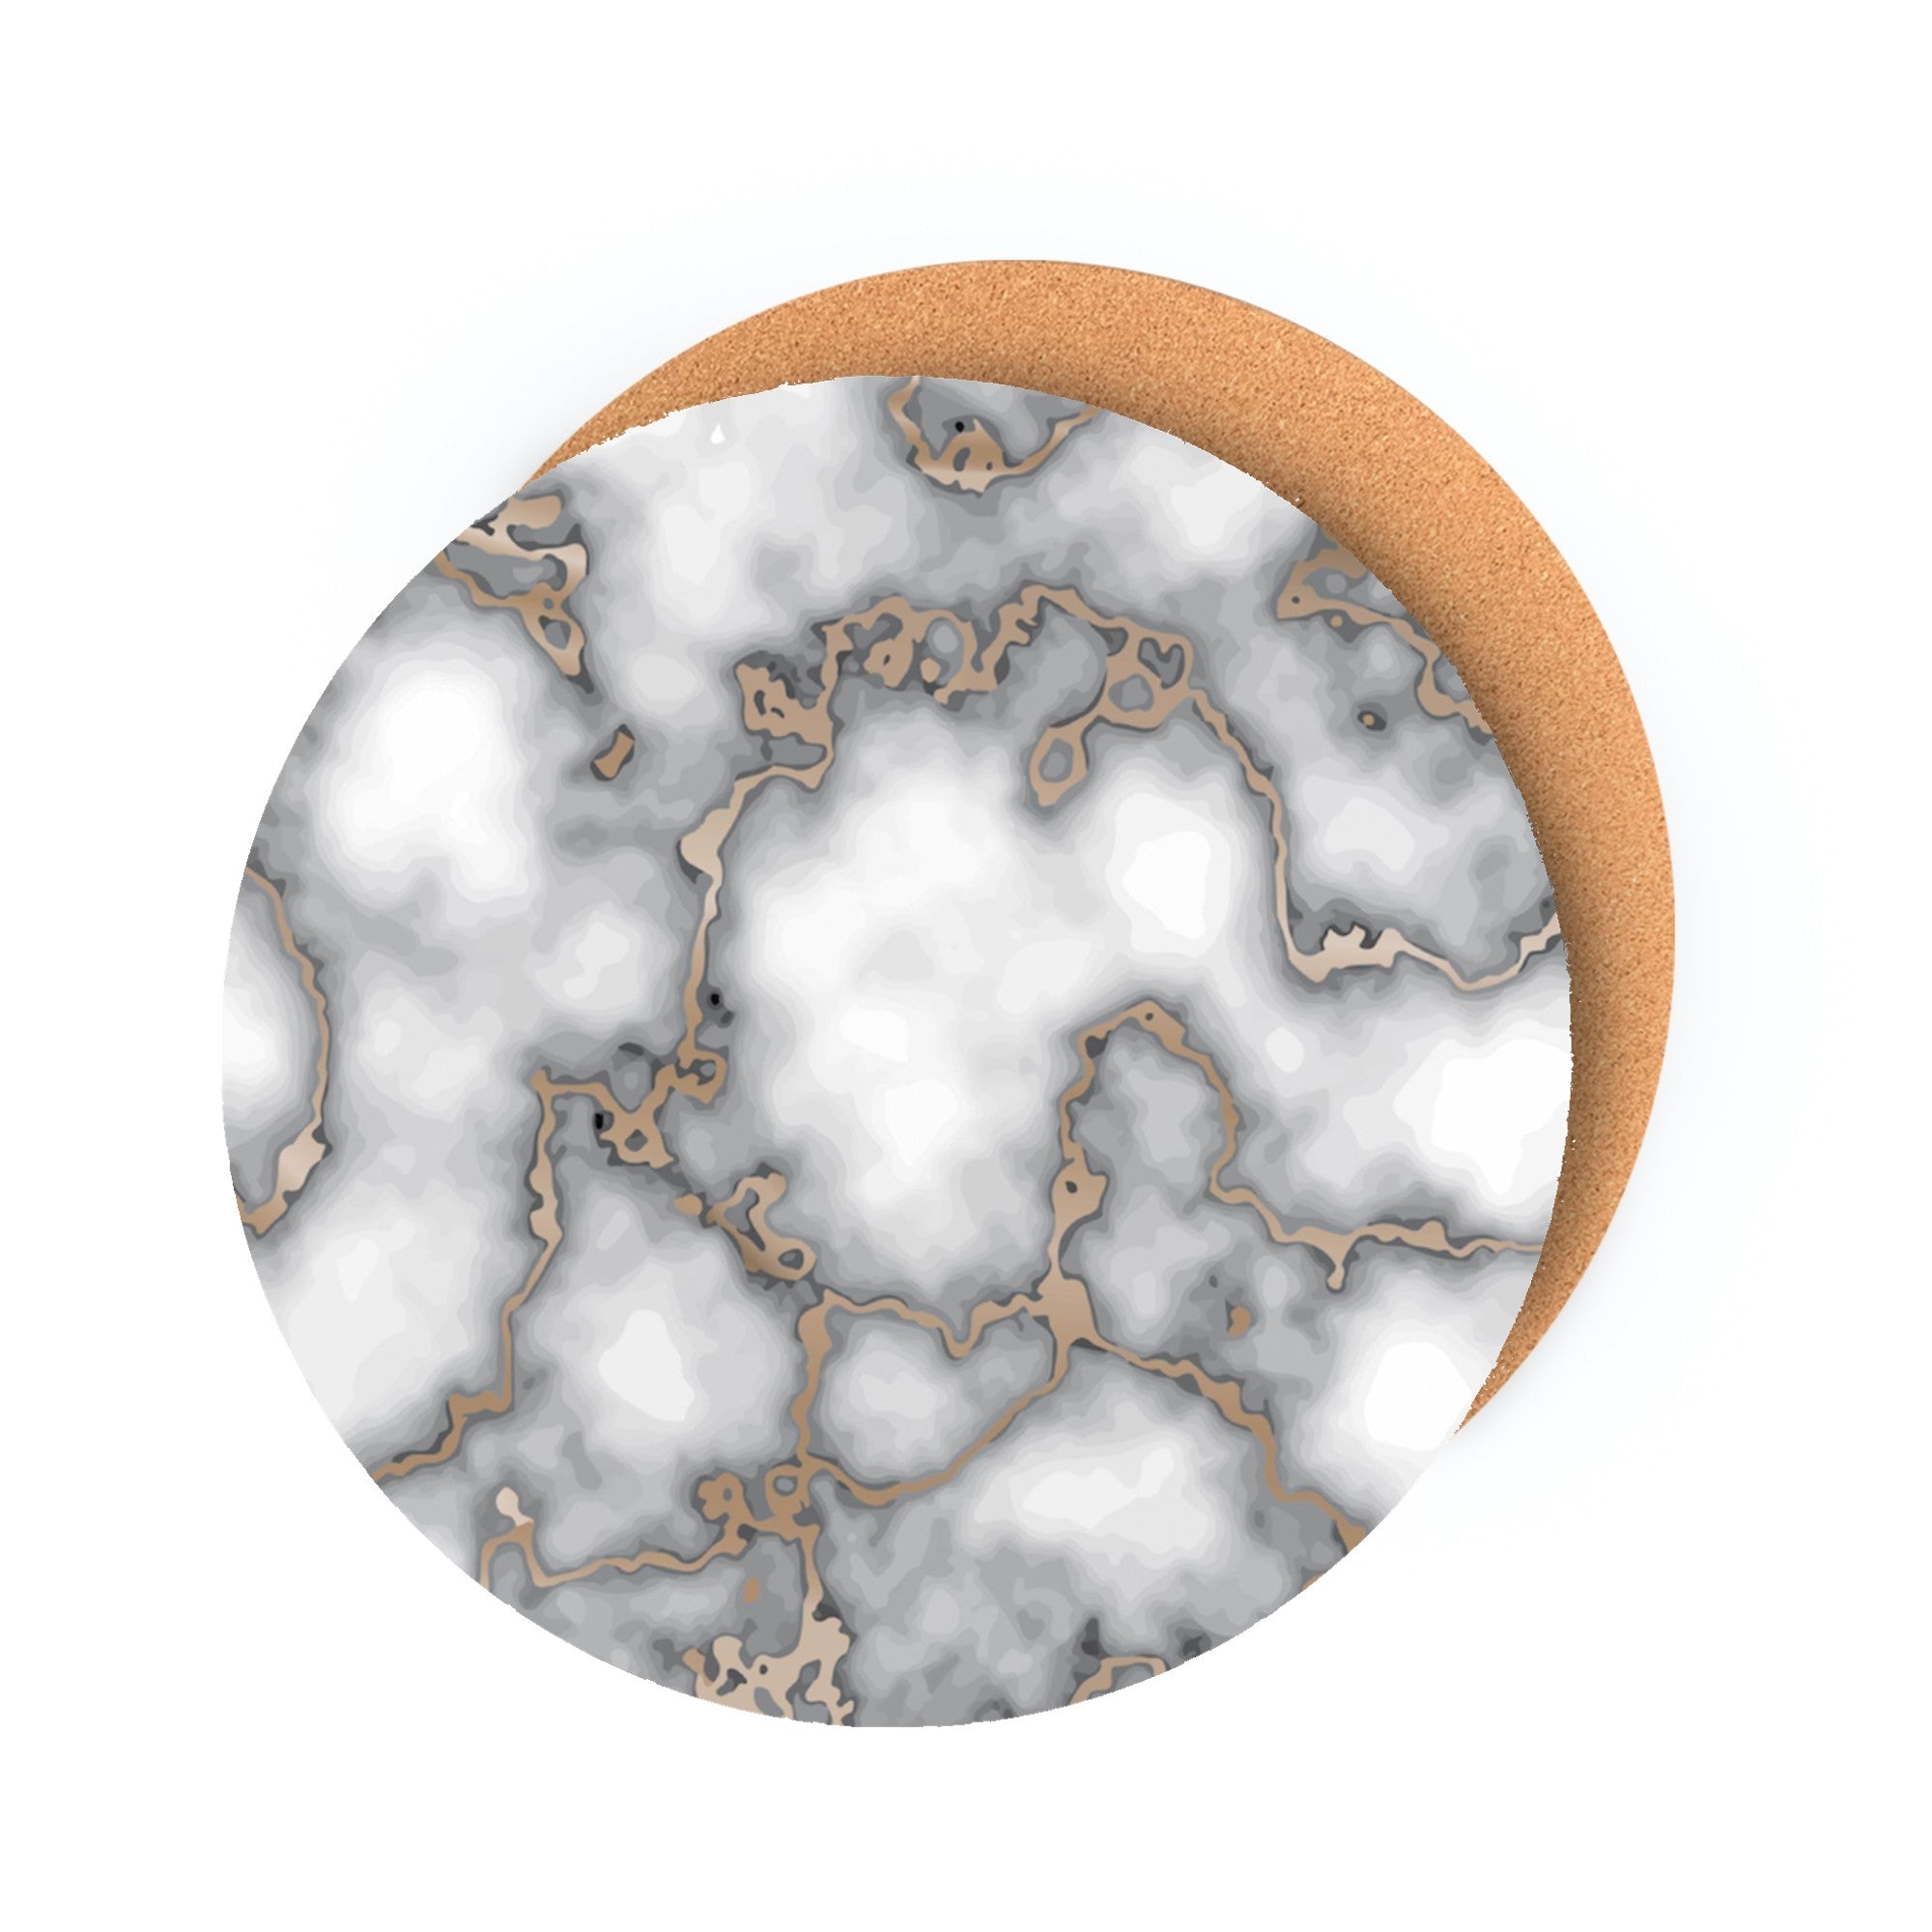 Dainty Home Marble Cork Foil Printed Marble Granite Designed Thick Cork Textured 15" x 15" Round Placemats